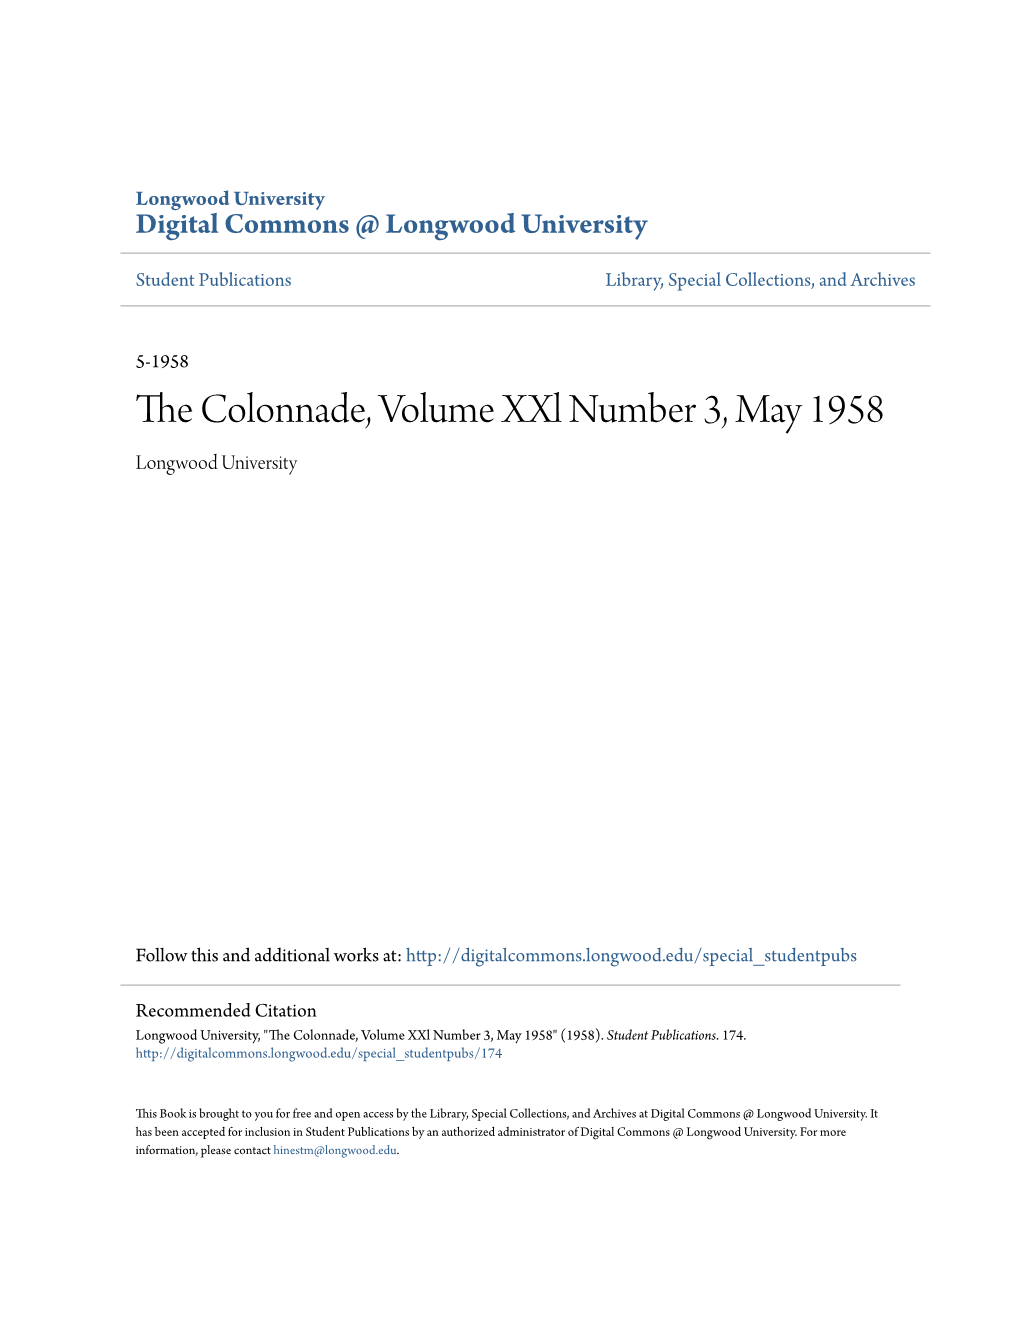 The Colonnade, Volume Xxl Number 3, May 1958